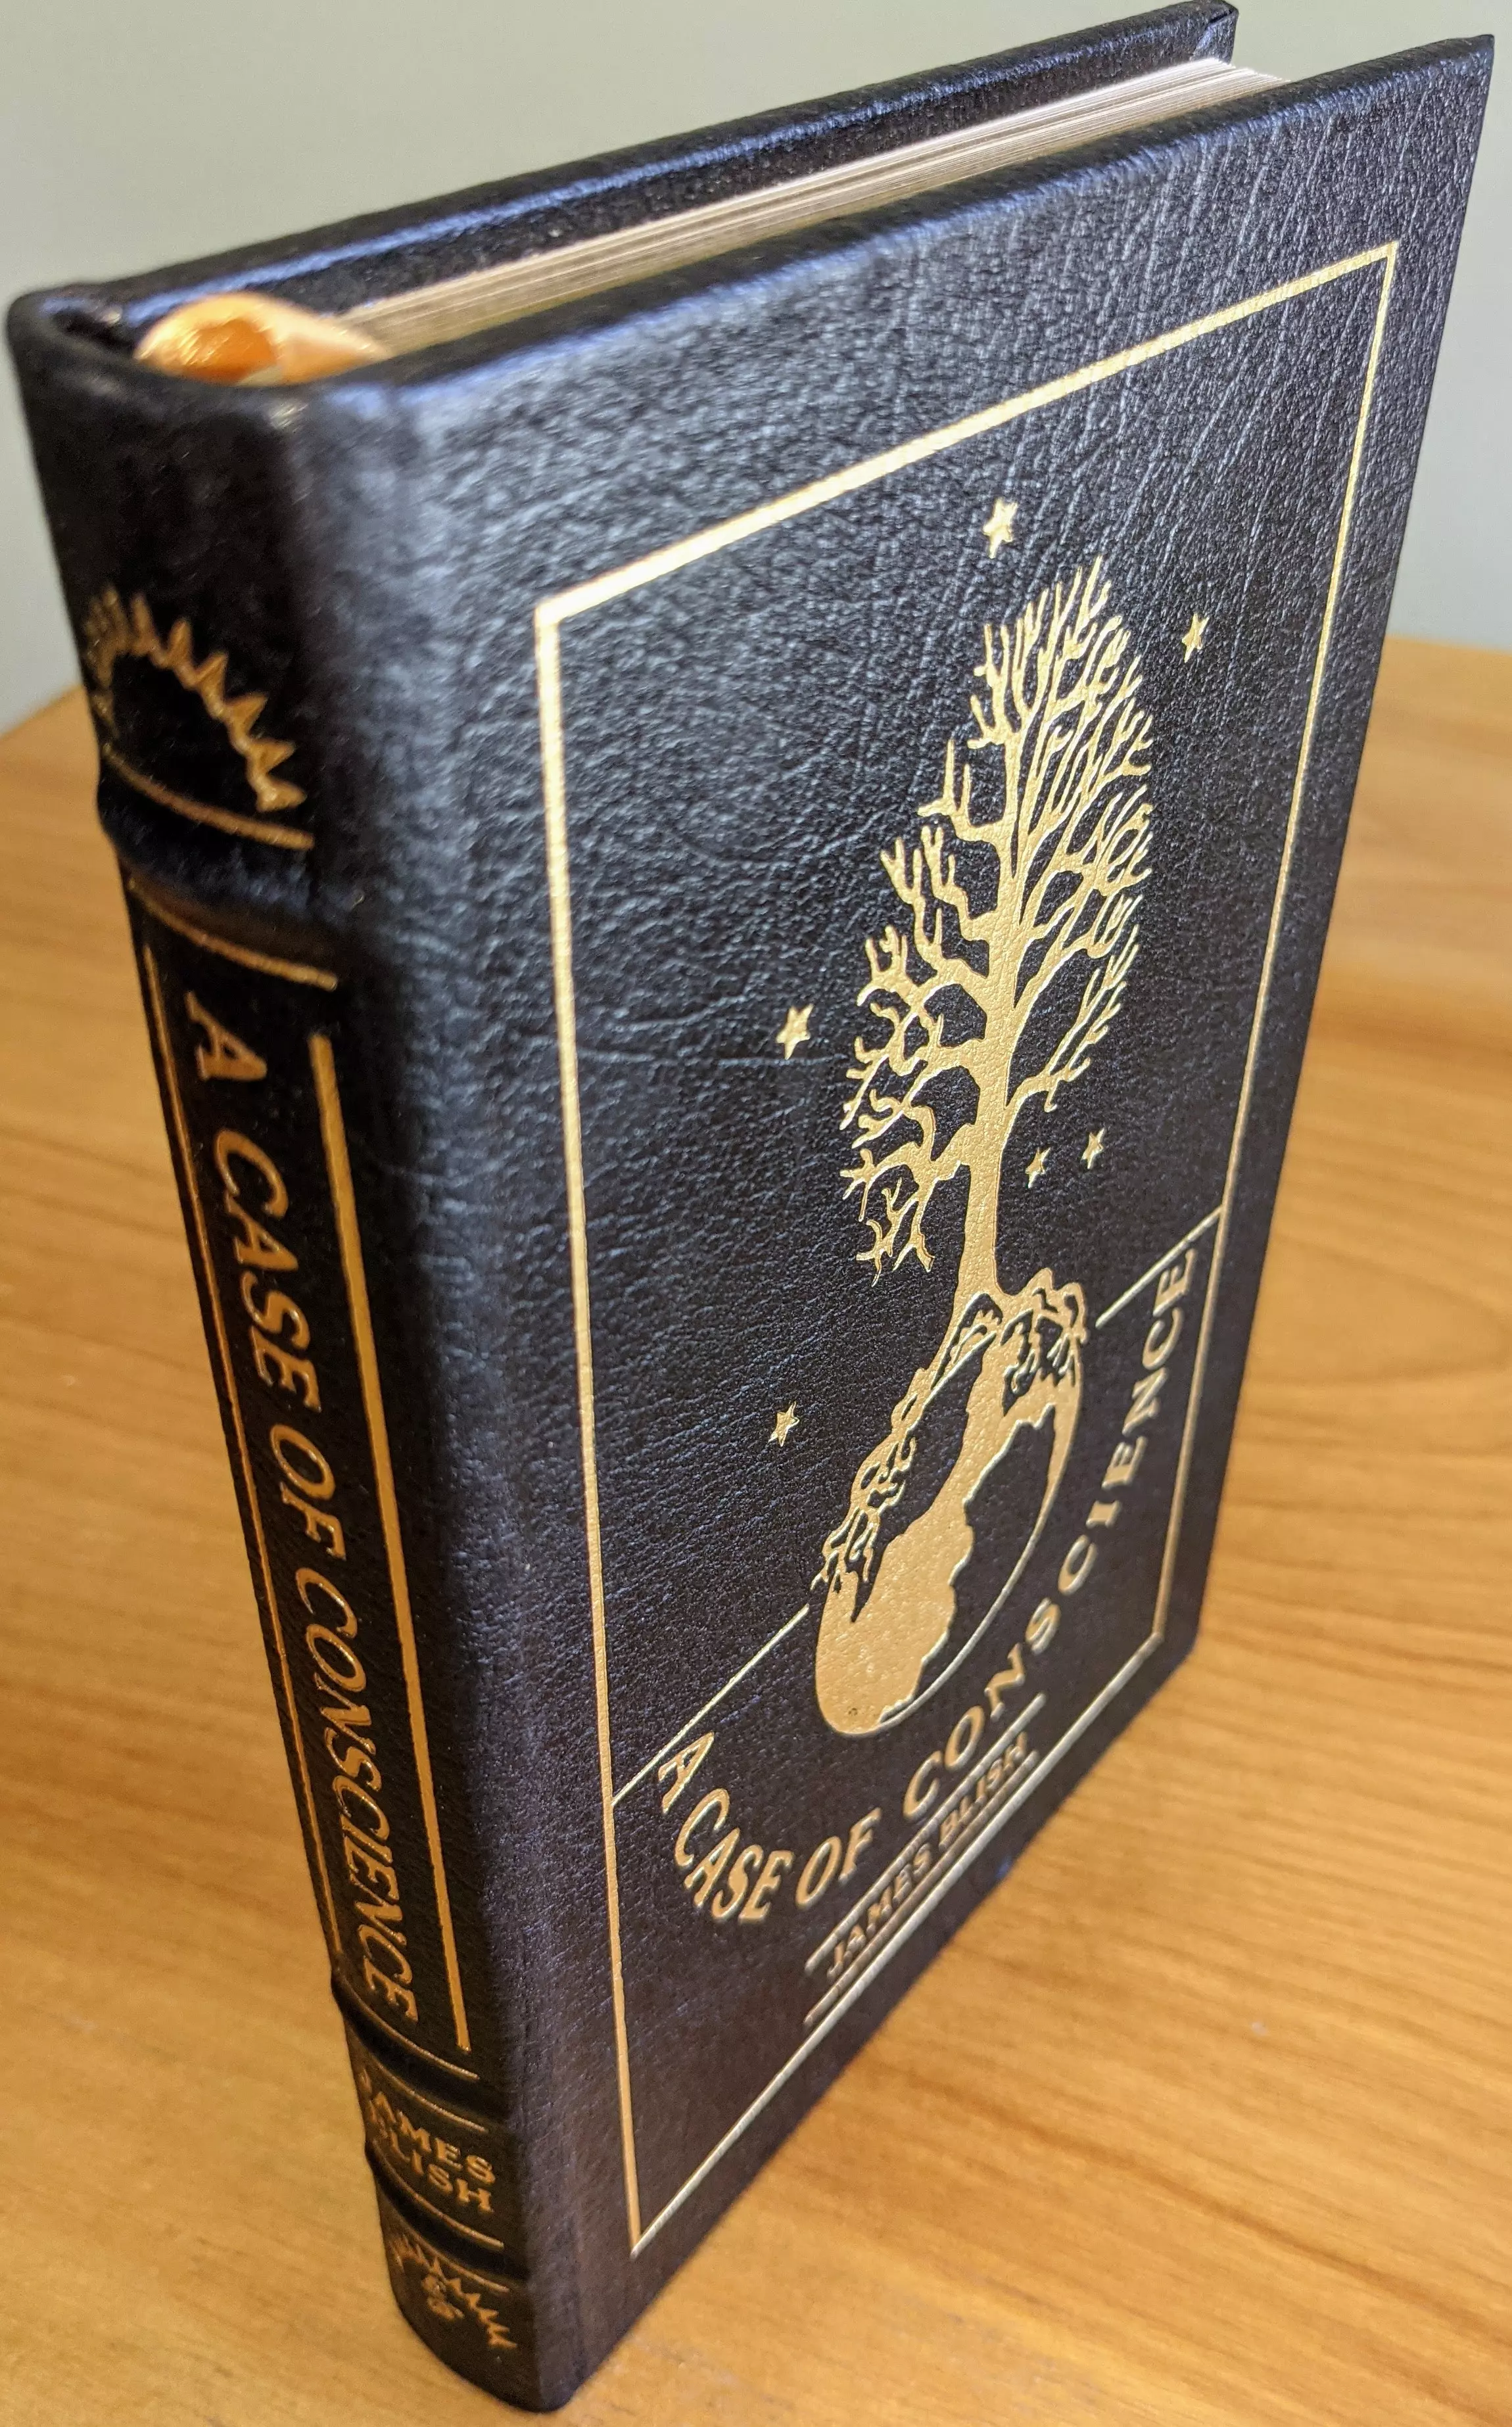 Stunning Black Leather Bound hardback book with hubbed spine, cover artwork in 22kt gold, printed on archival paper with gold gilded edges, smyth sewing & concealed muslin joints
	  - original artwork by Ellen Sull Farley